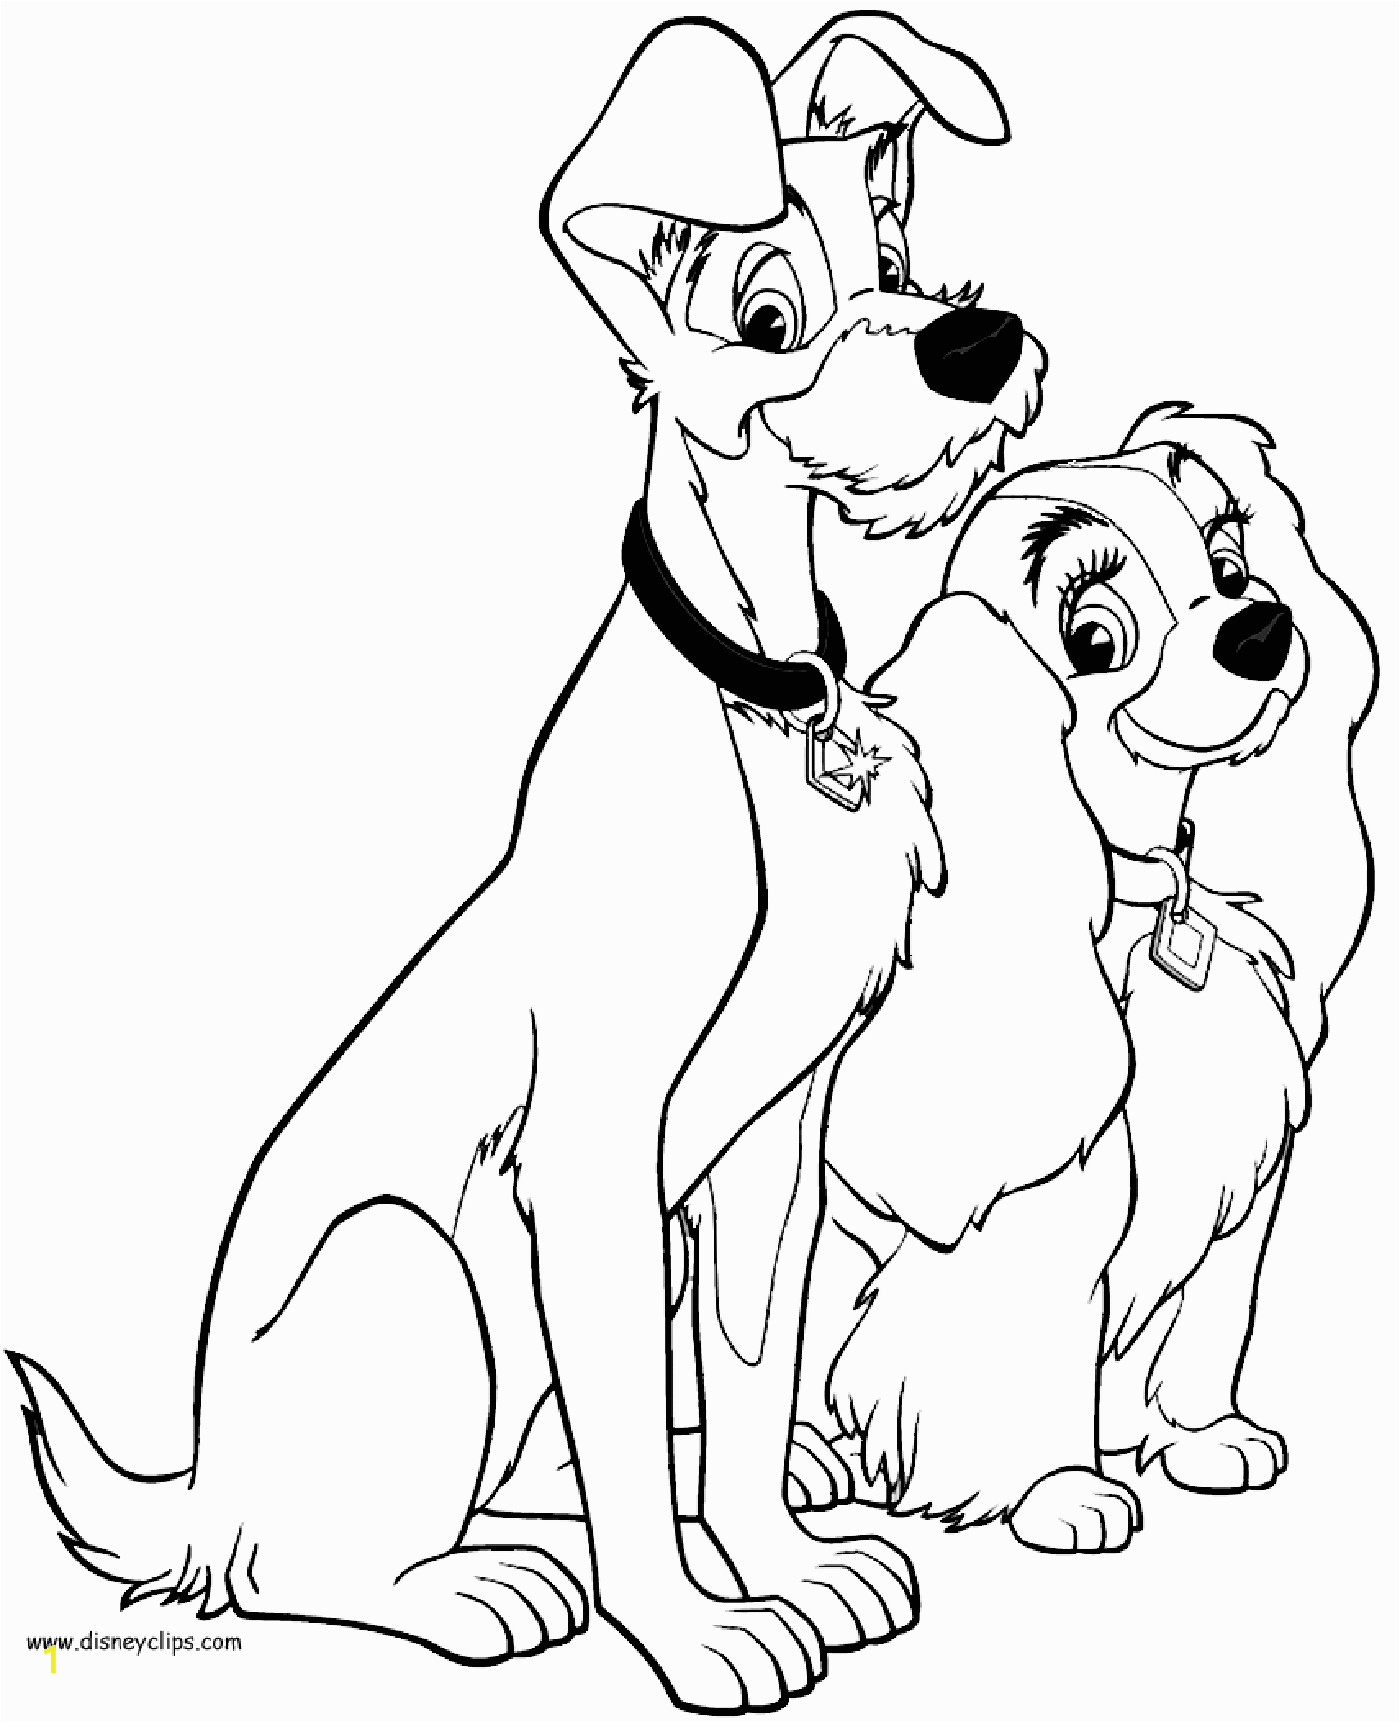 Lady and the Tramp Coloring Pages the Lady and the Tramp for Children the Lady and the